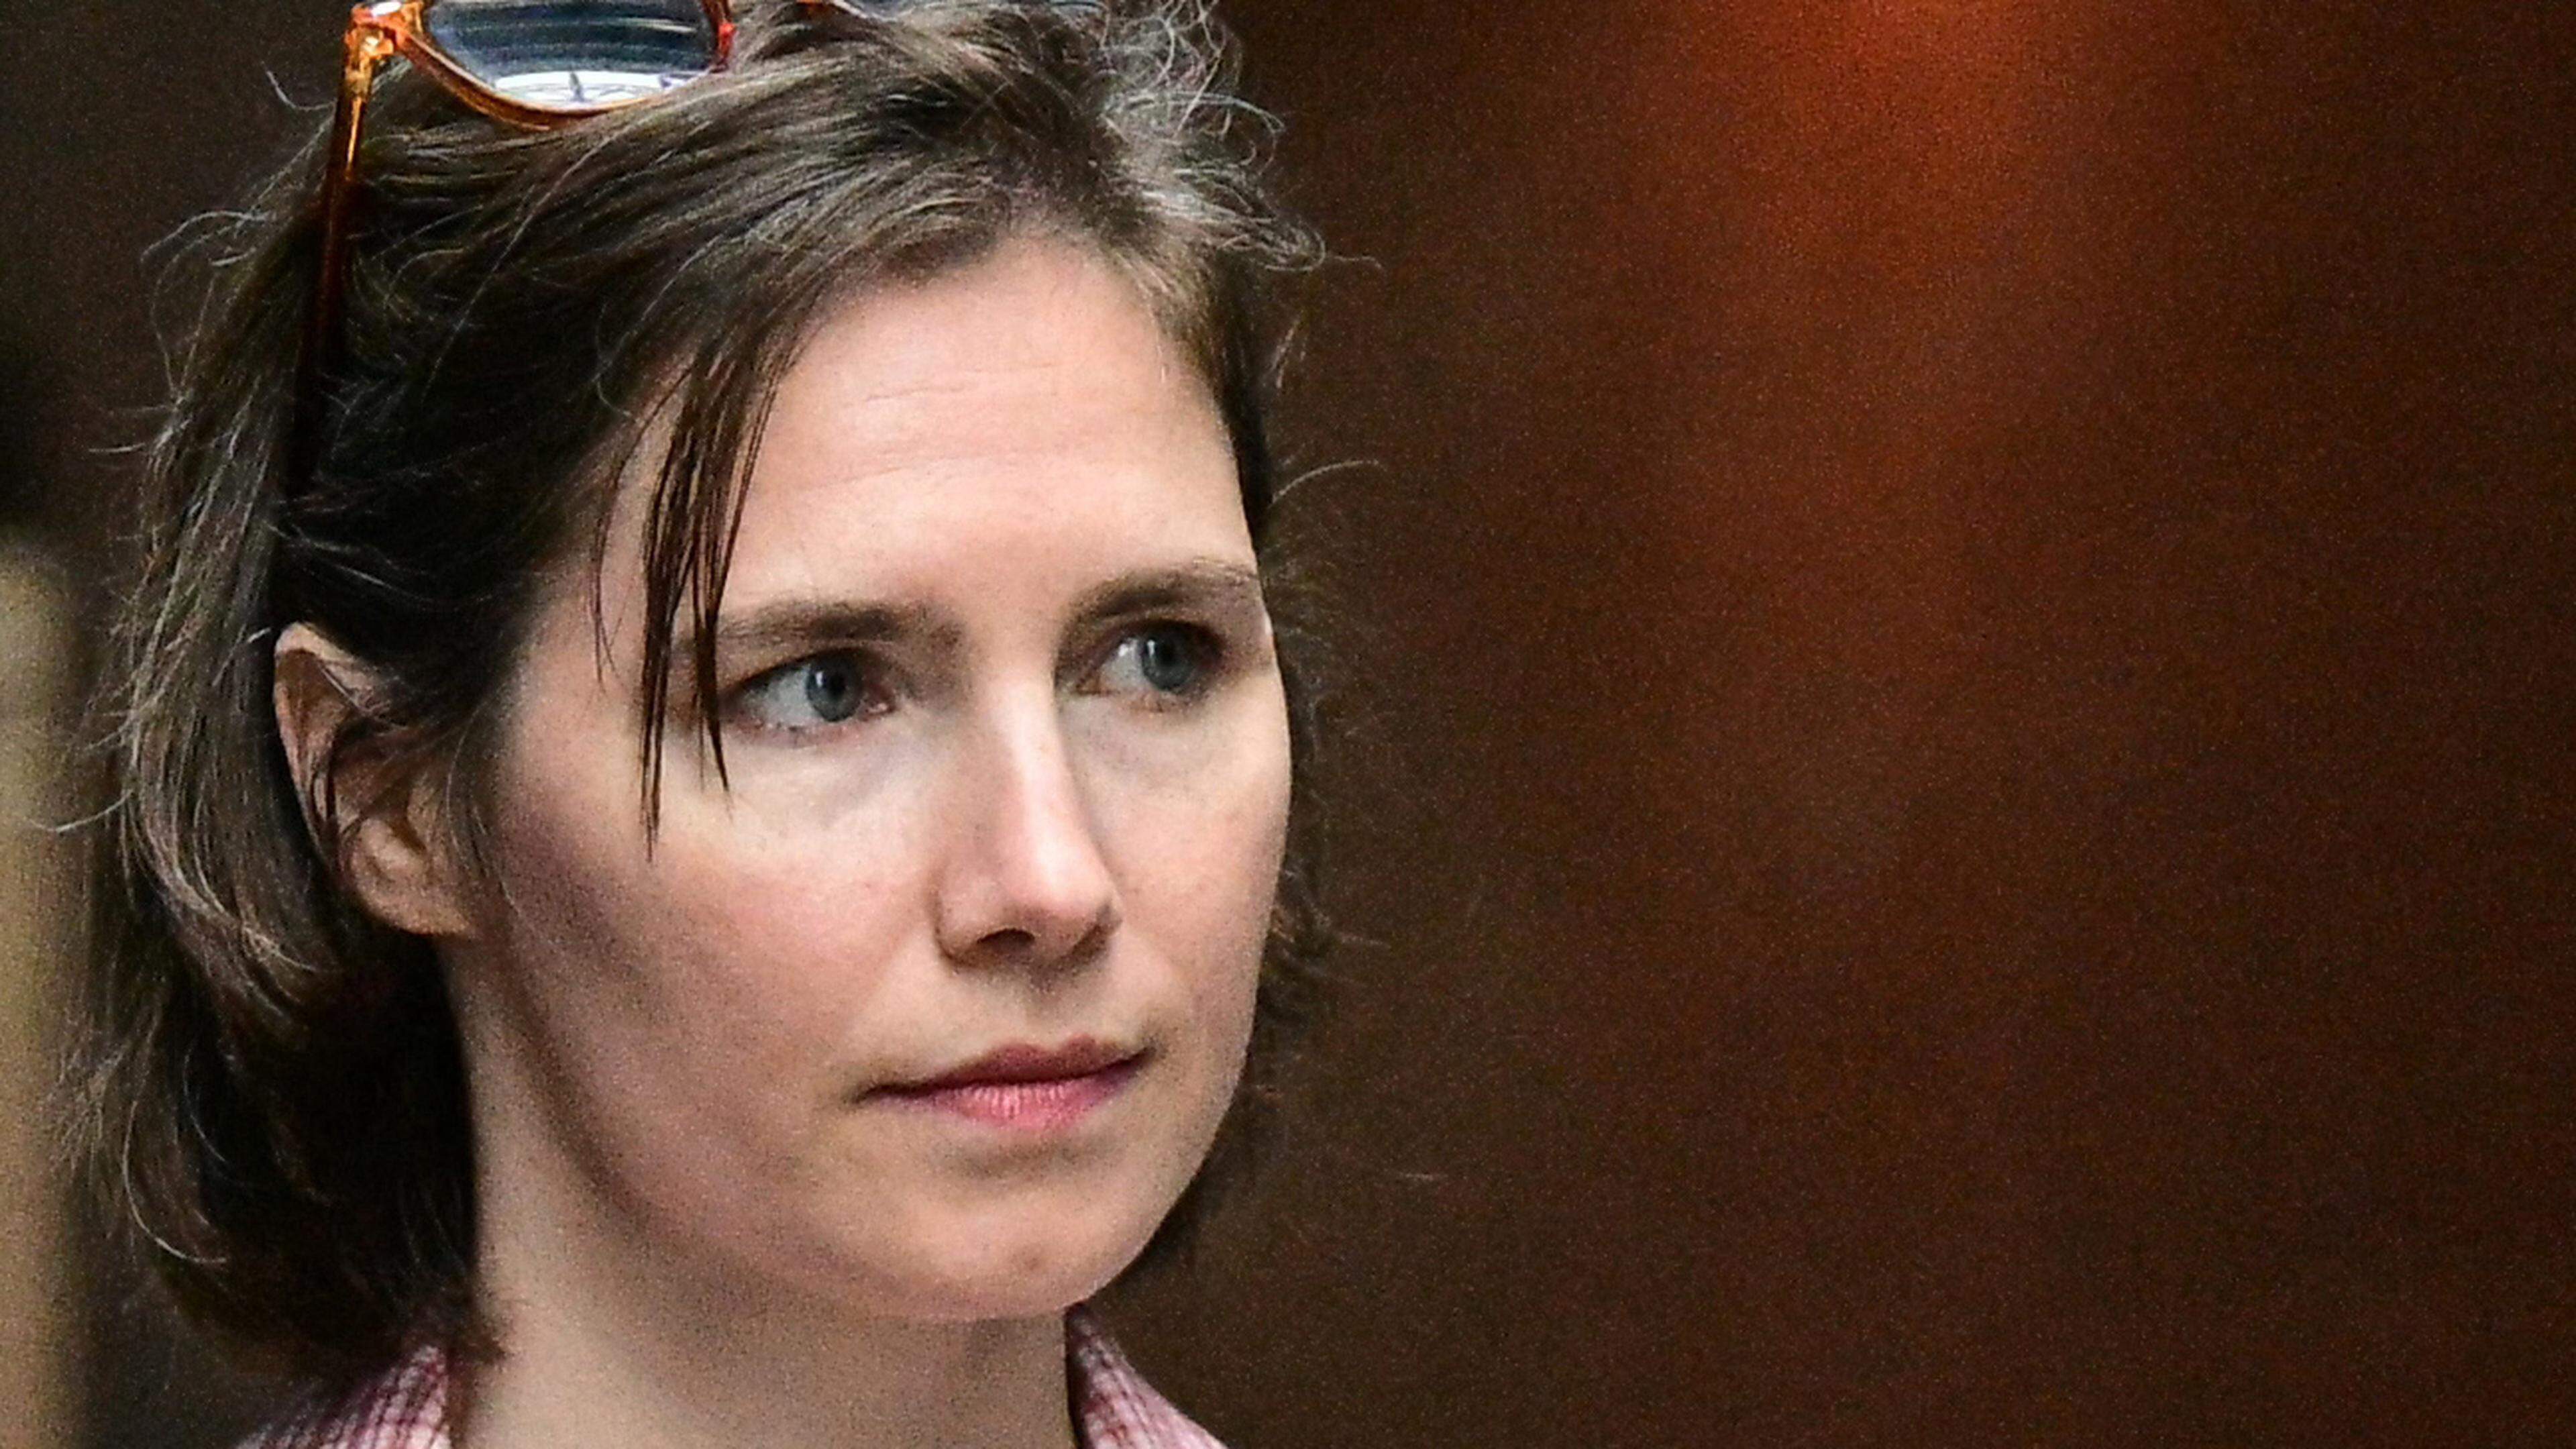 US Amanda Knox arrives at the courthouse in Florence, on June 5, 2024 before a hearing in a slander case, related to her jailing and later acquittal for the murder of her British roommate in 2007. The American was only 20 when she and her Italian then-boyfriend were arrested for the brutal killing of 21-year-old fellow student Meredith Kercher at the girls' shared home in Perugia. The murder began a long legal saga where Knox was found guilty, acquitted, found guilty again and finally cleared of all charges in 2015. (Photo by Tiziana FABI / AFP)